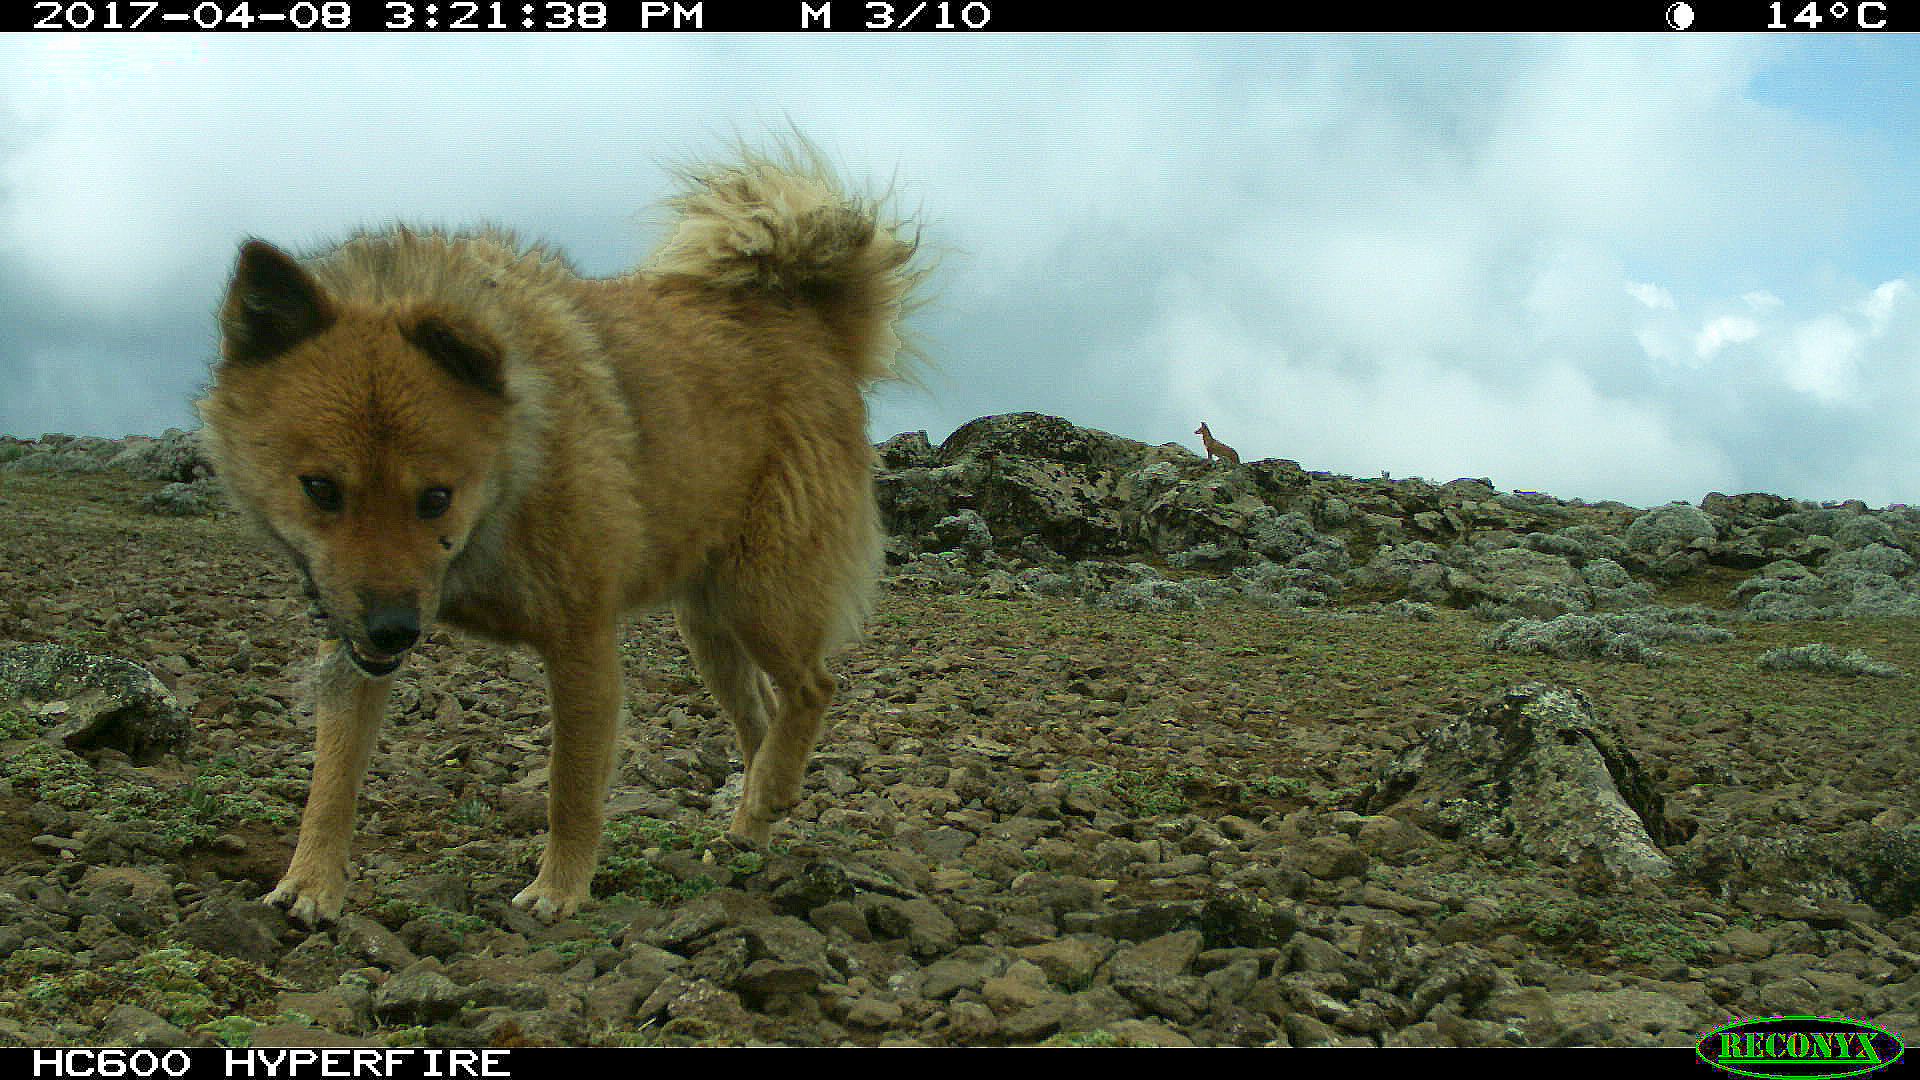 Camera trap image with domestic dog in foreground and Ethiopian wolf in background